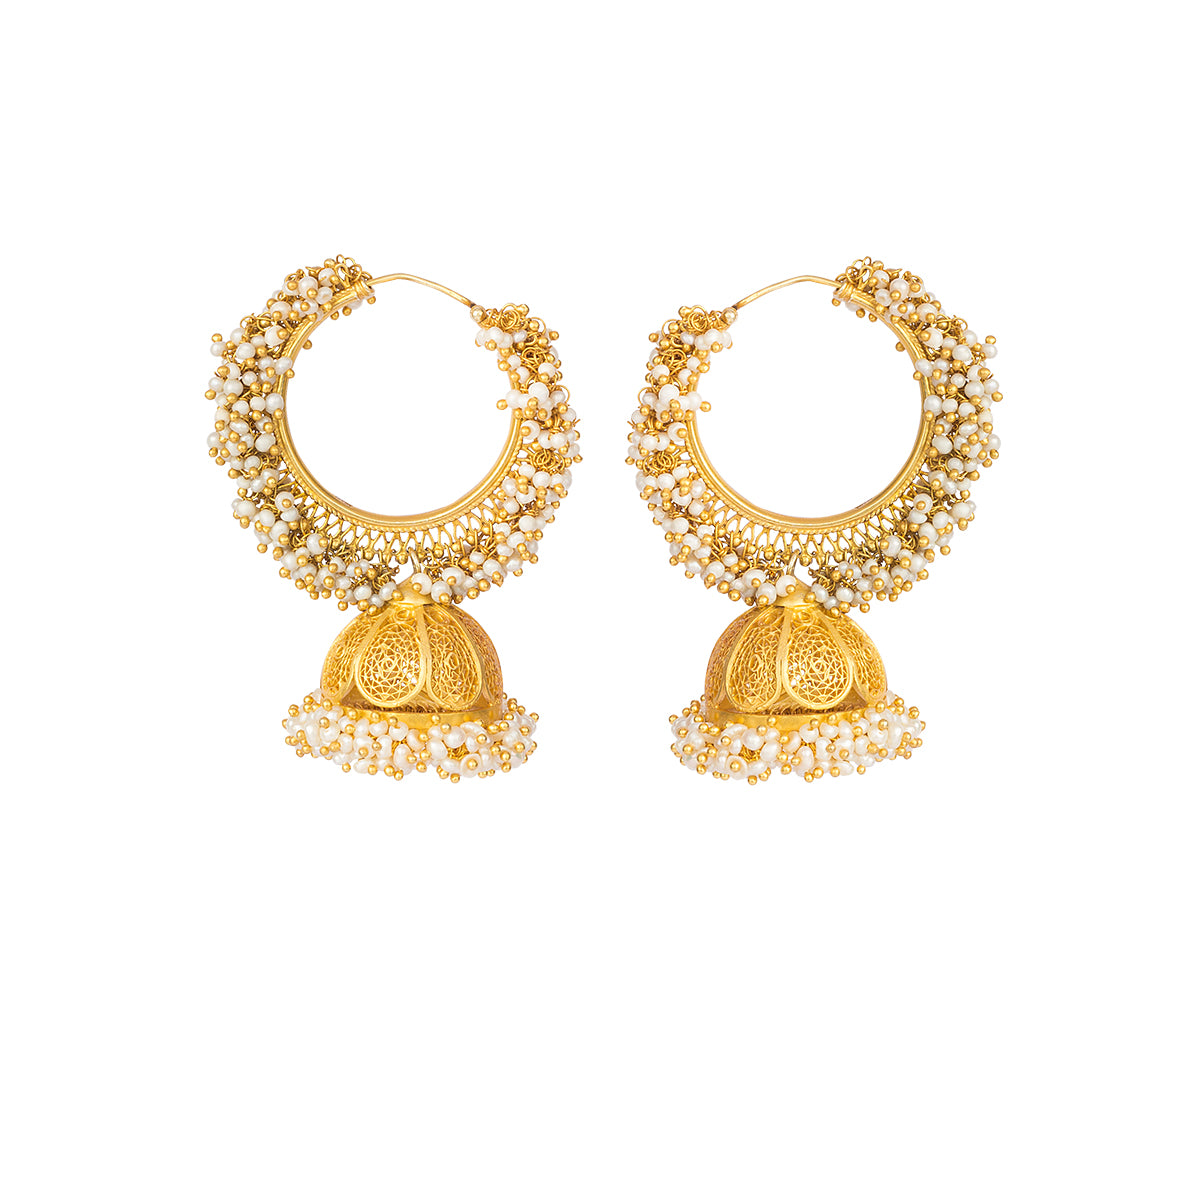 Saved for a special occassion and sealed with love, these gold-plates silver earrings are decorated with pearls in a hoop & jhumka design. They remind us of the golden days and eternal love!